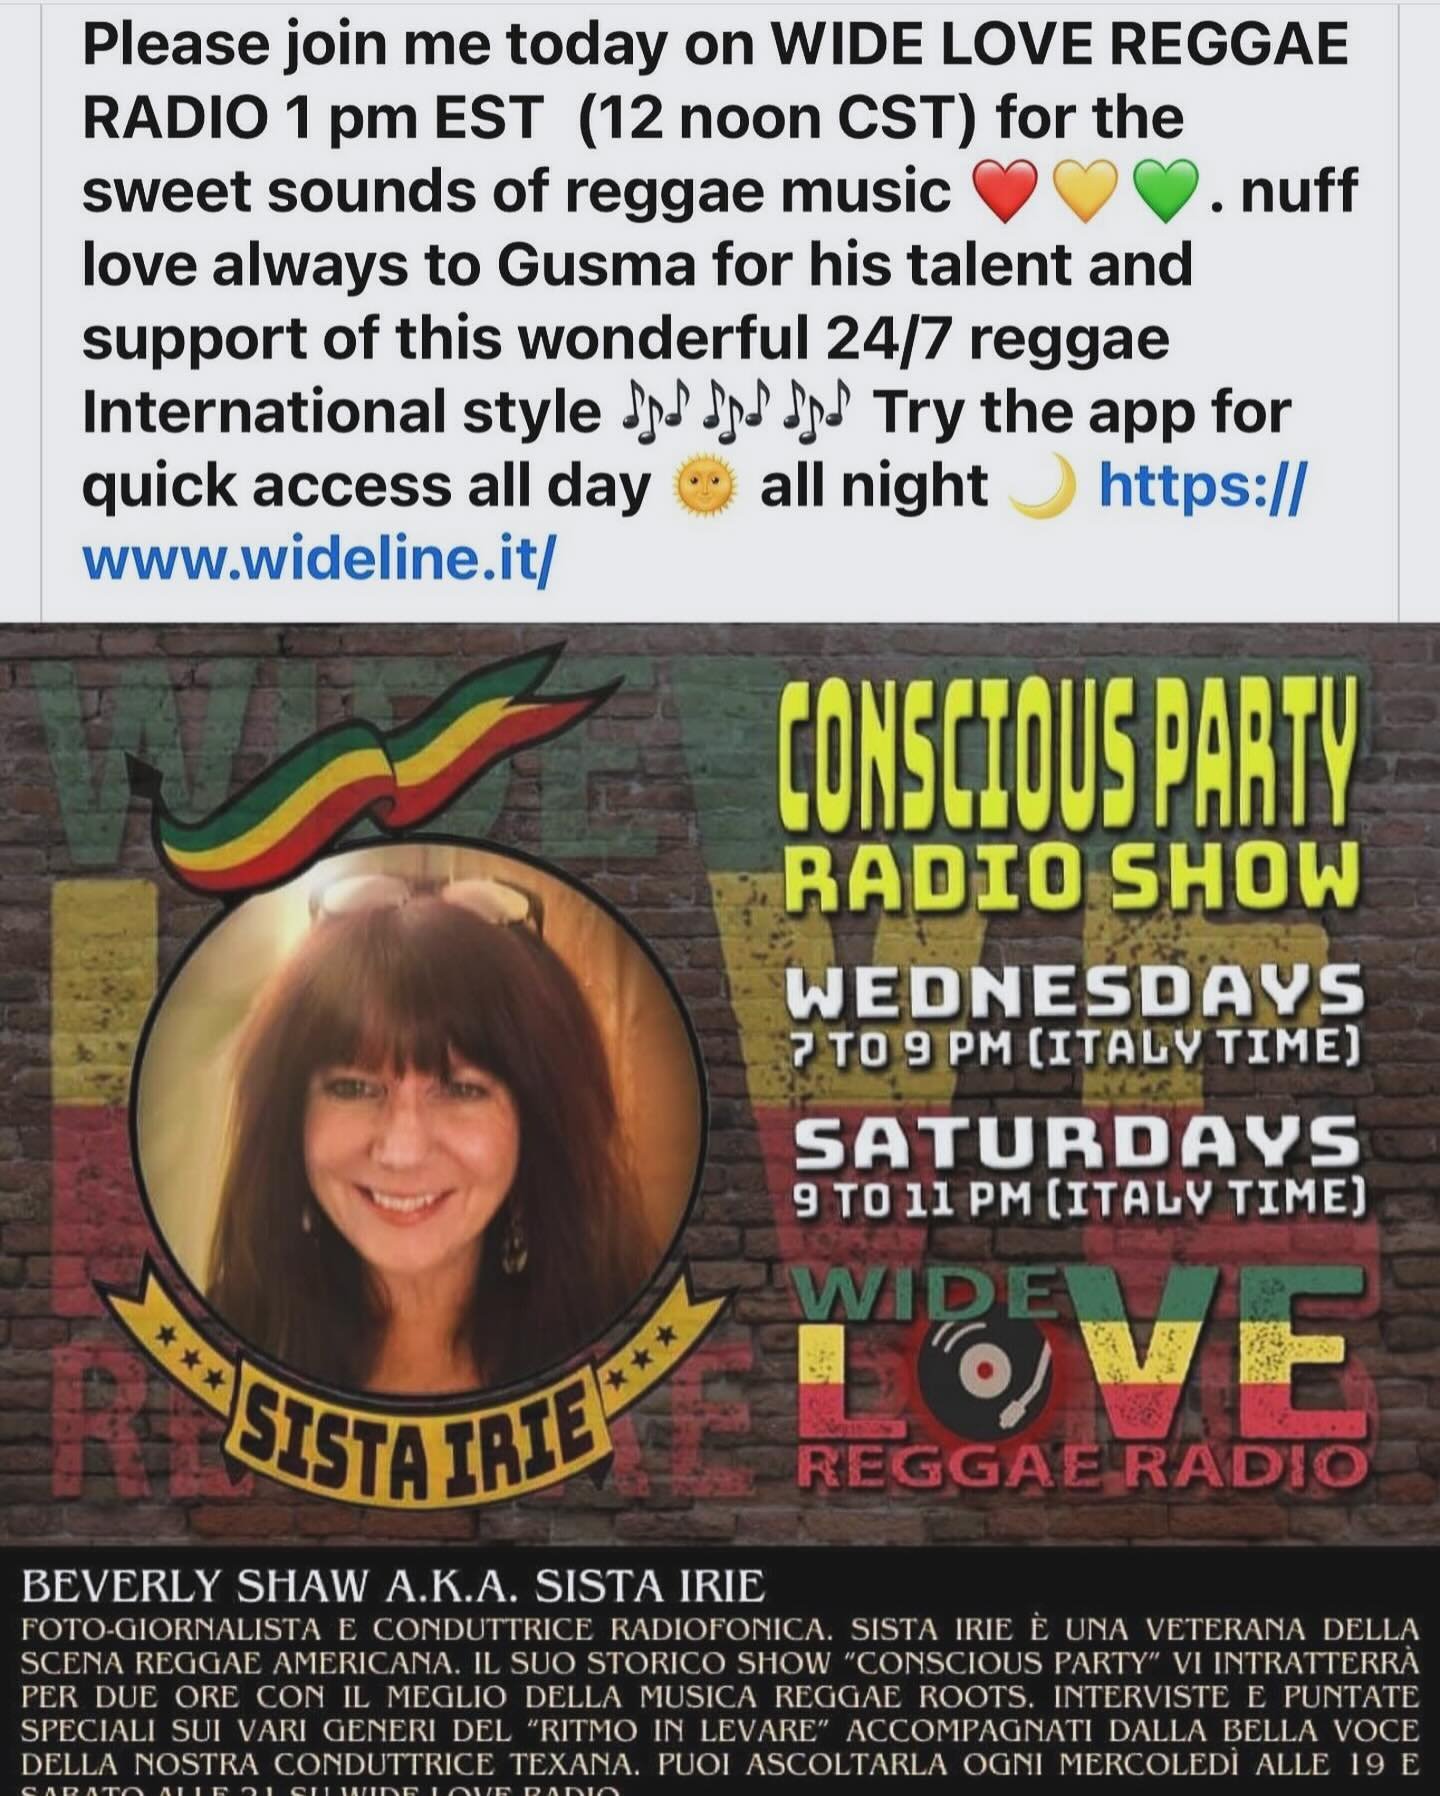 SISTA IRIE&rsquo;S CONSCIOUS PARTY *today* at noon CST or 1 pm EST. Wednesday May 8th WIDE LOVE REGGAE RADIO. wideline.it or download the free app for 24/7 reggae streaming from Italy! @majestymediaglobal @lloydstanbury @djgusma @sista_irie